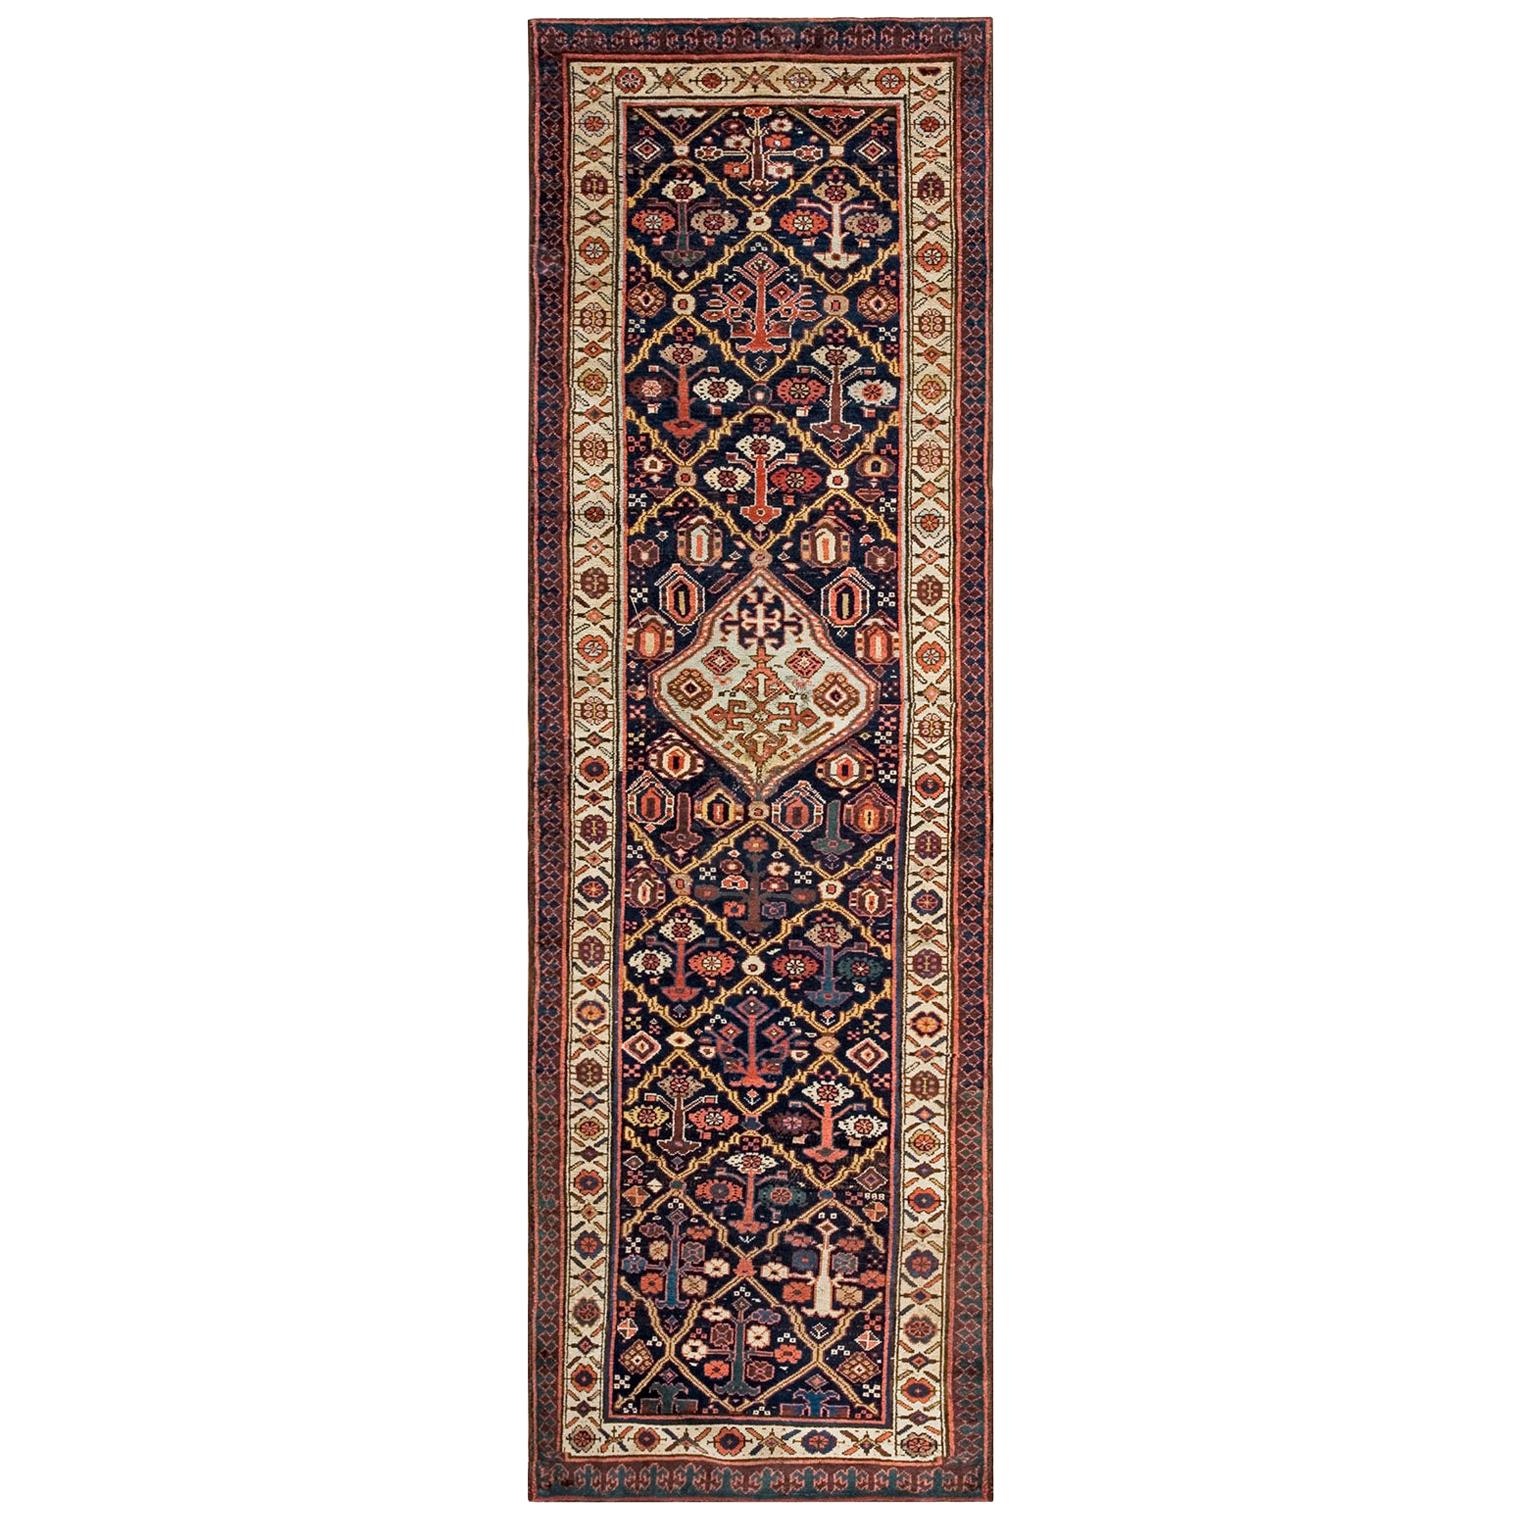 19rth Century N.W. Persian Runner Carpet ( 3'3" x 10'3" - 99 x 312 ) For Sale